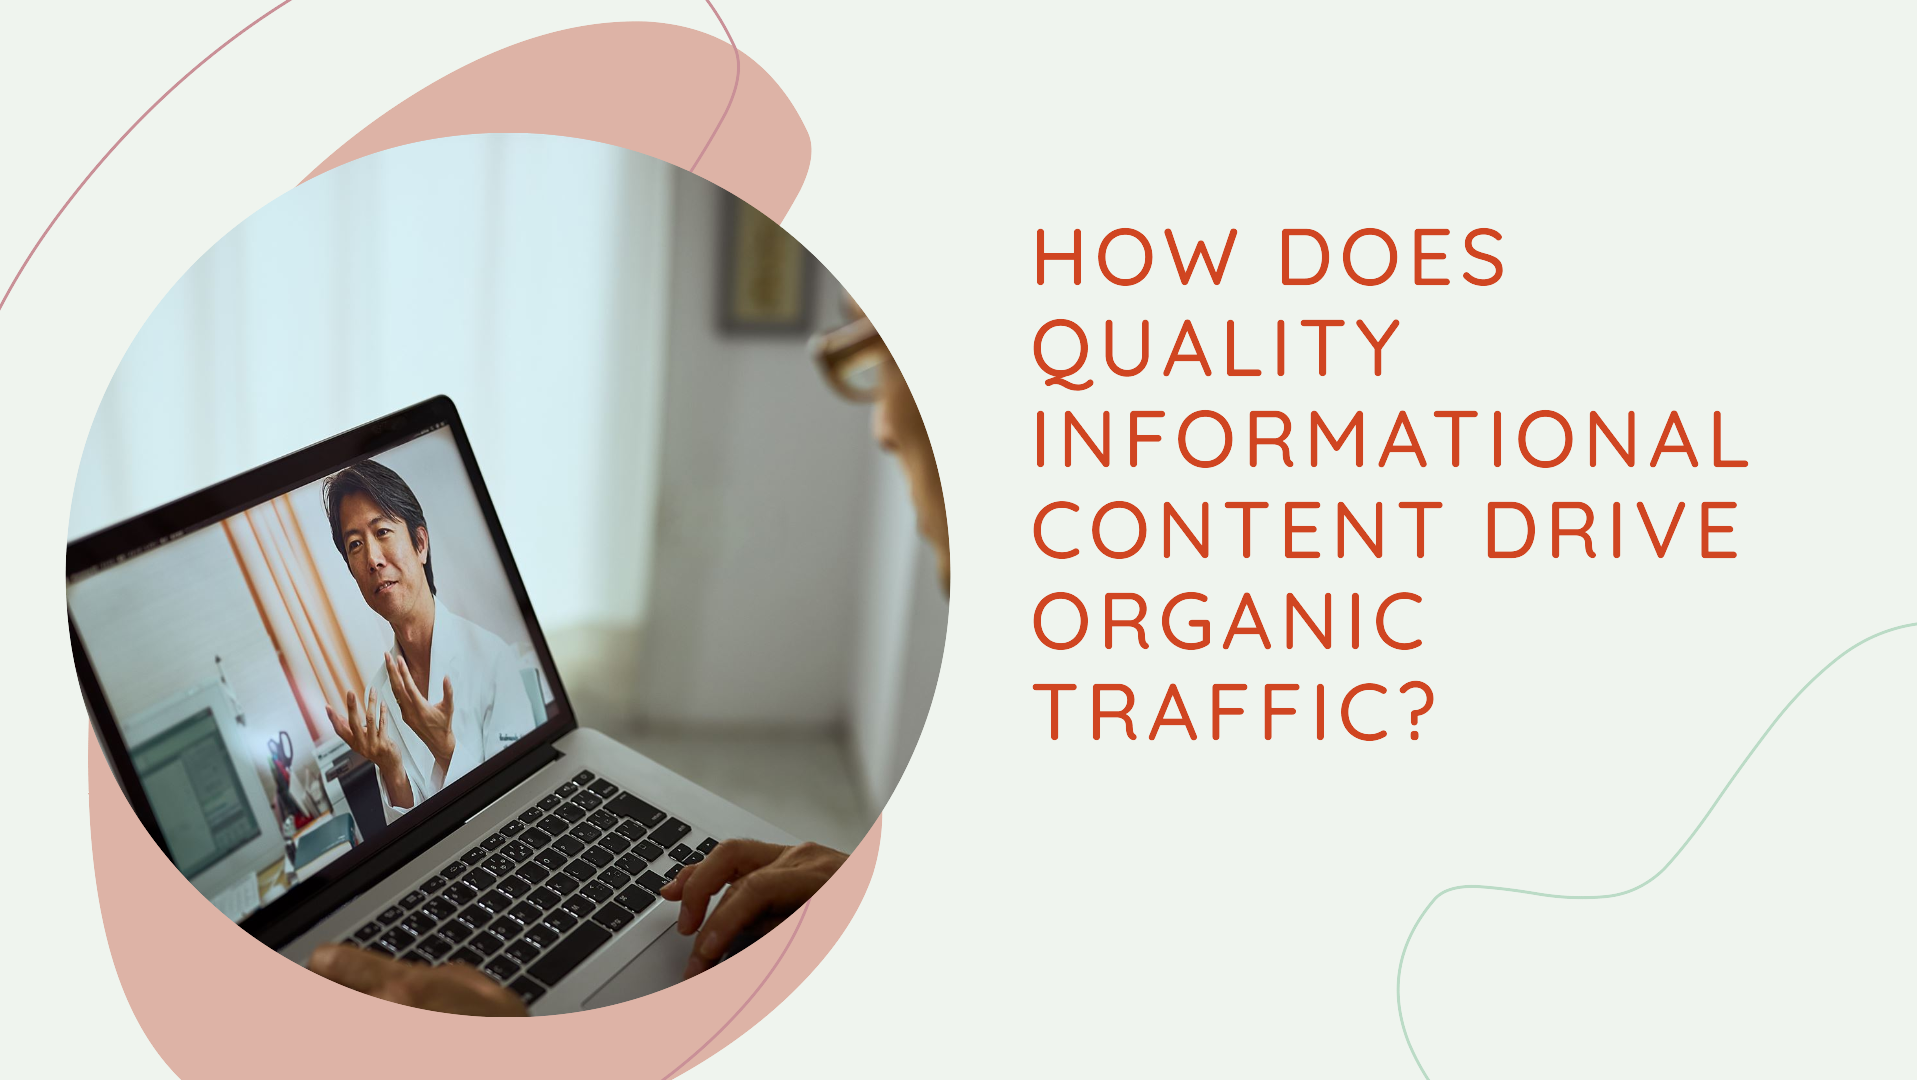 How Does Quality Informational Content Drive Organic Traffic?